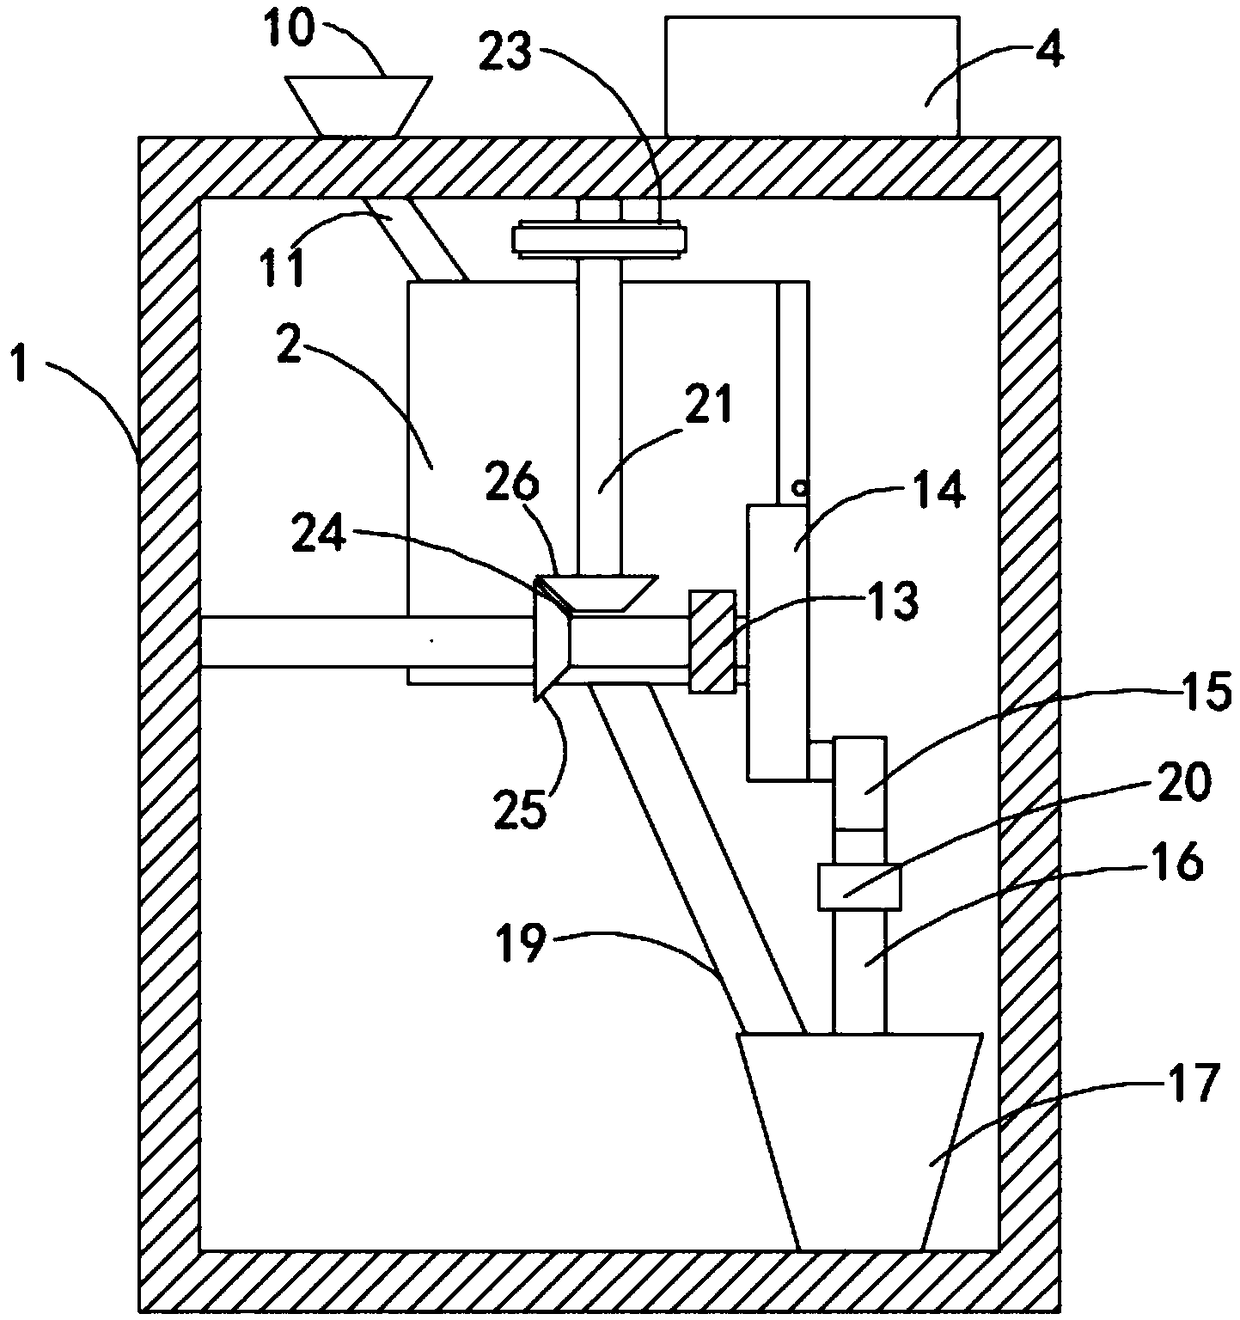 Mashing device for processing pesticide residue detecting sample